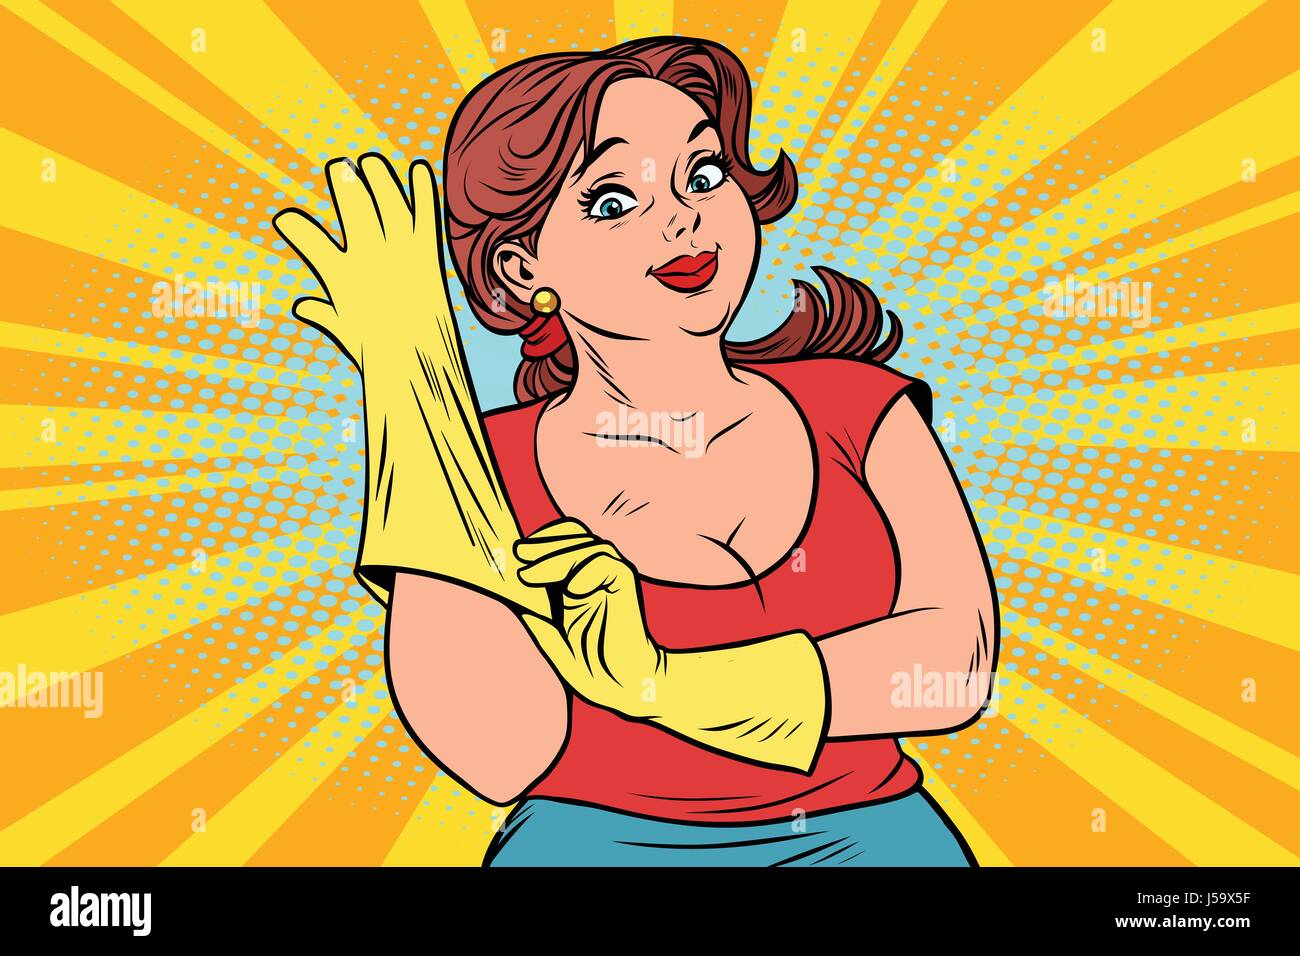 16+ Thousand Cartoon Cleaning Woman Royalty-Free Images, Stock